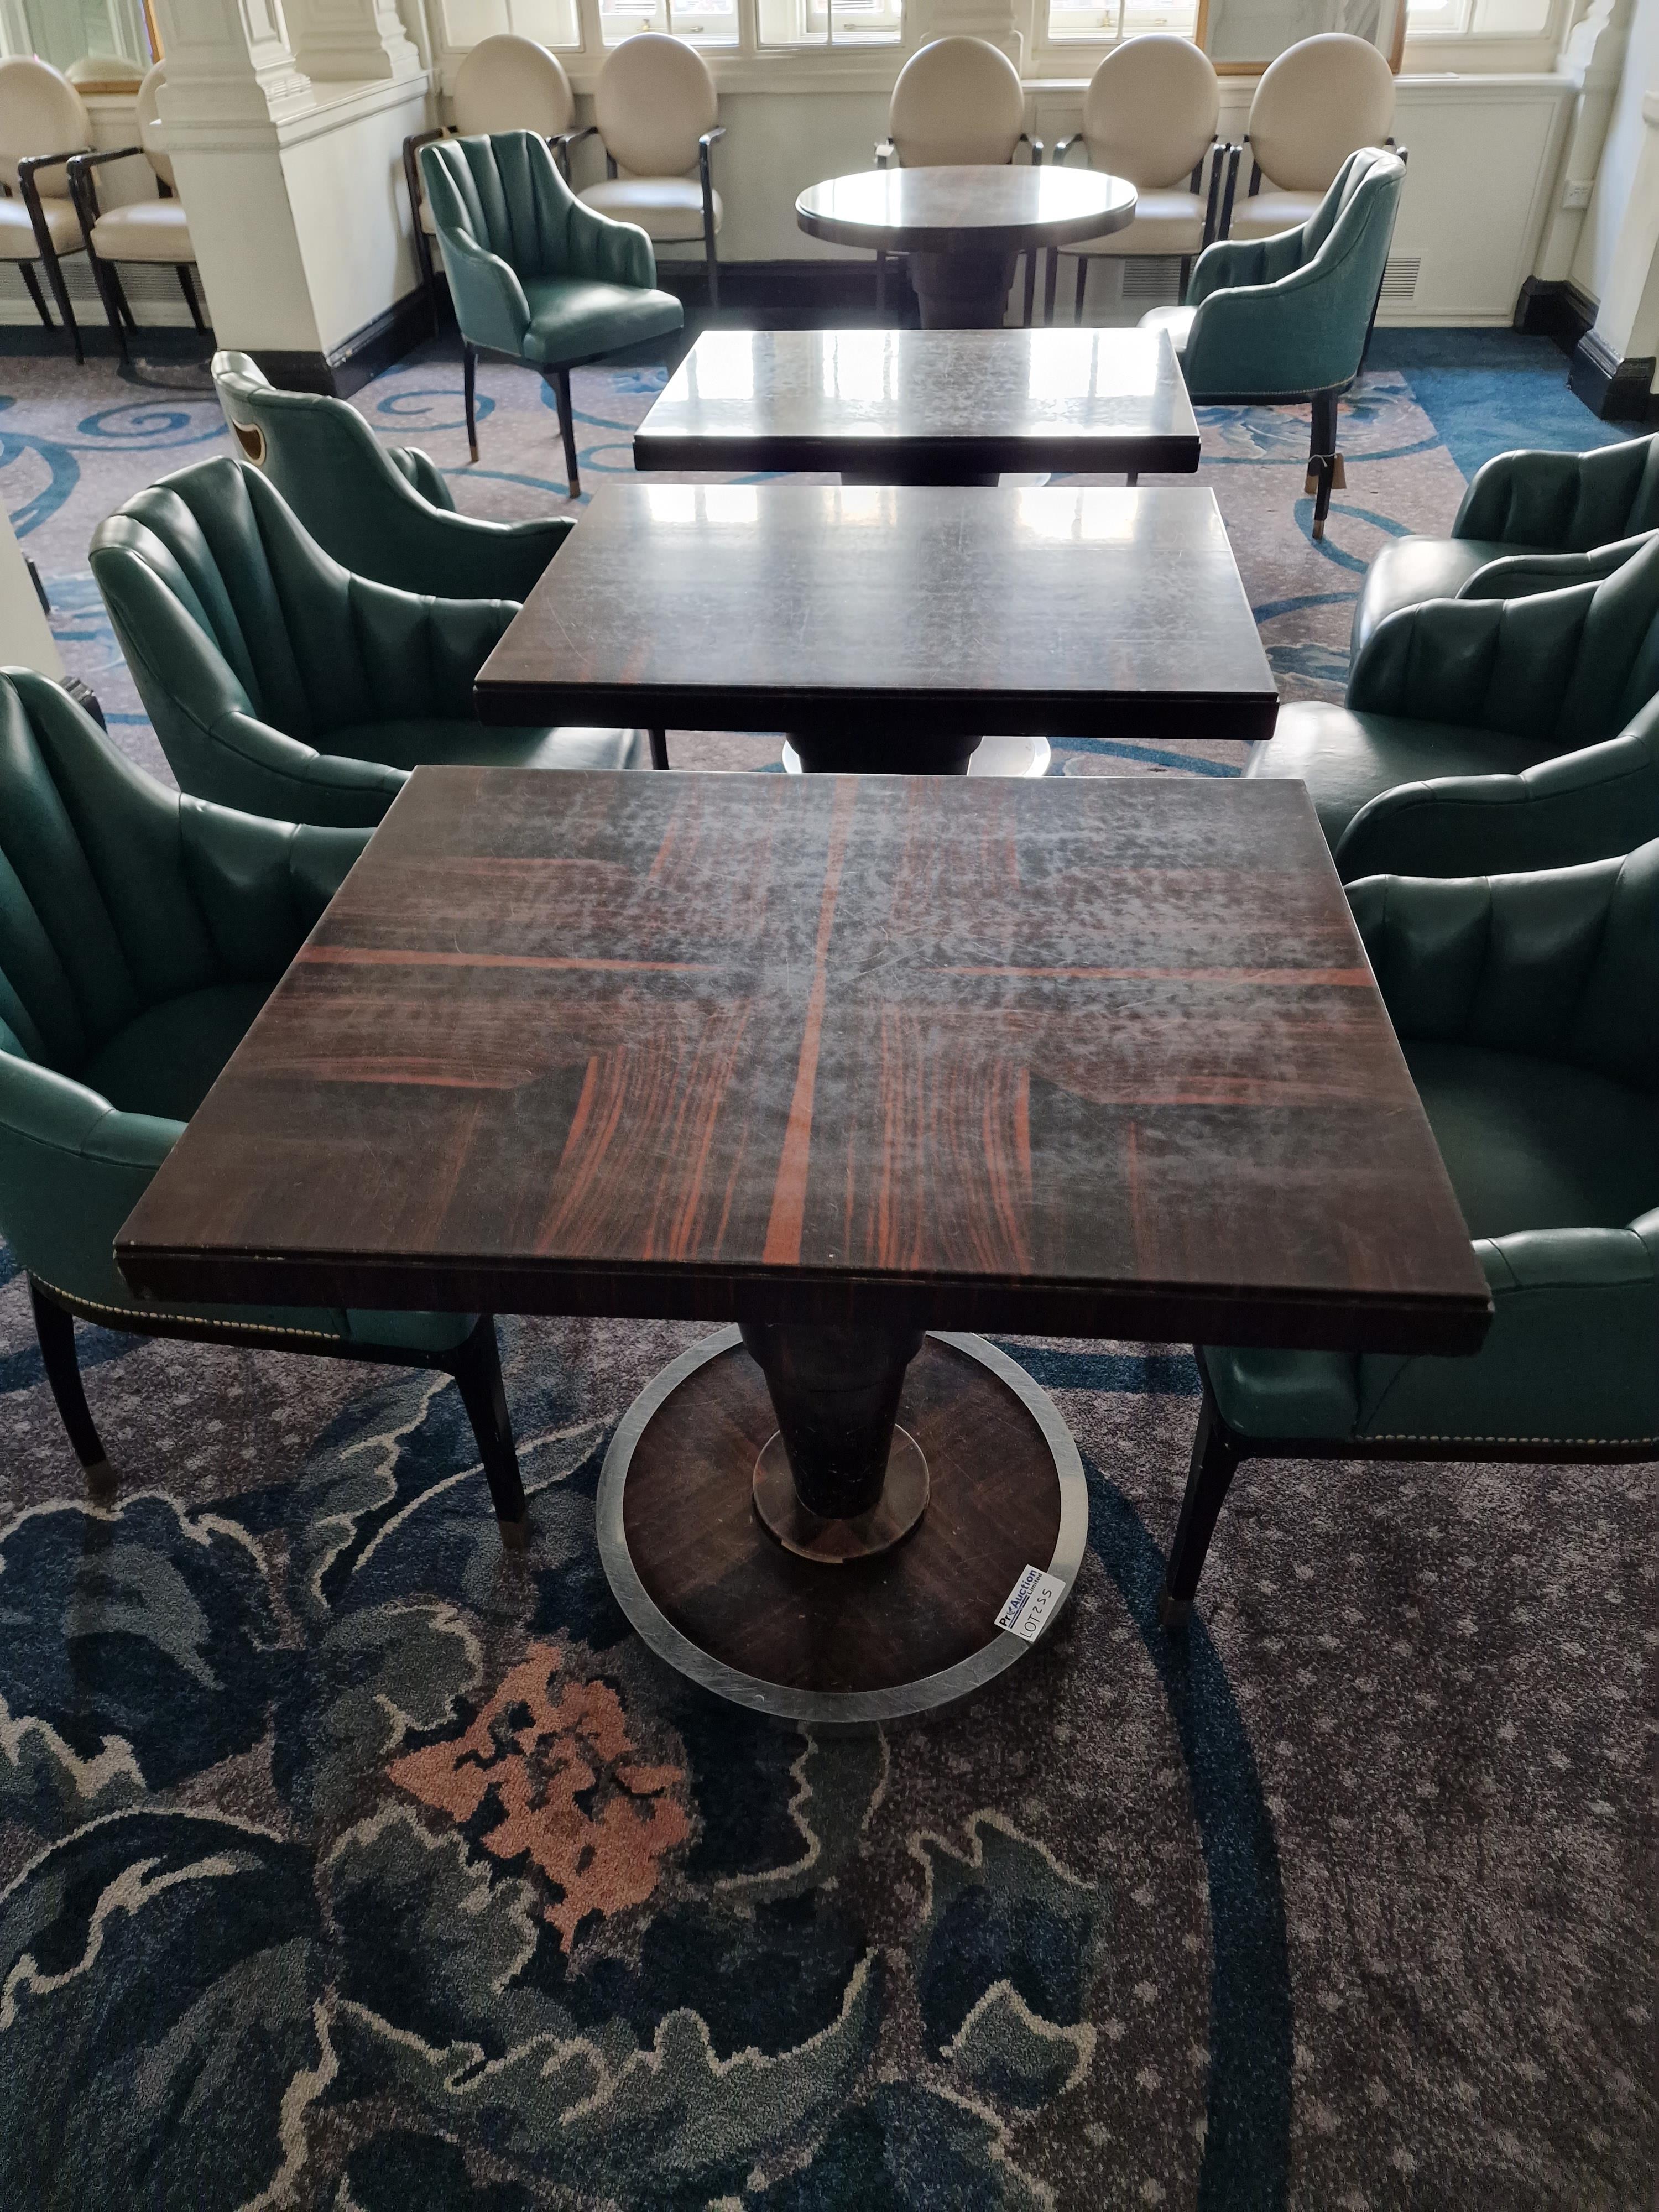 Rectangular dining table art deco style macassar ebony and palm veneer on solid timber frame - Image 6 of 6